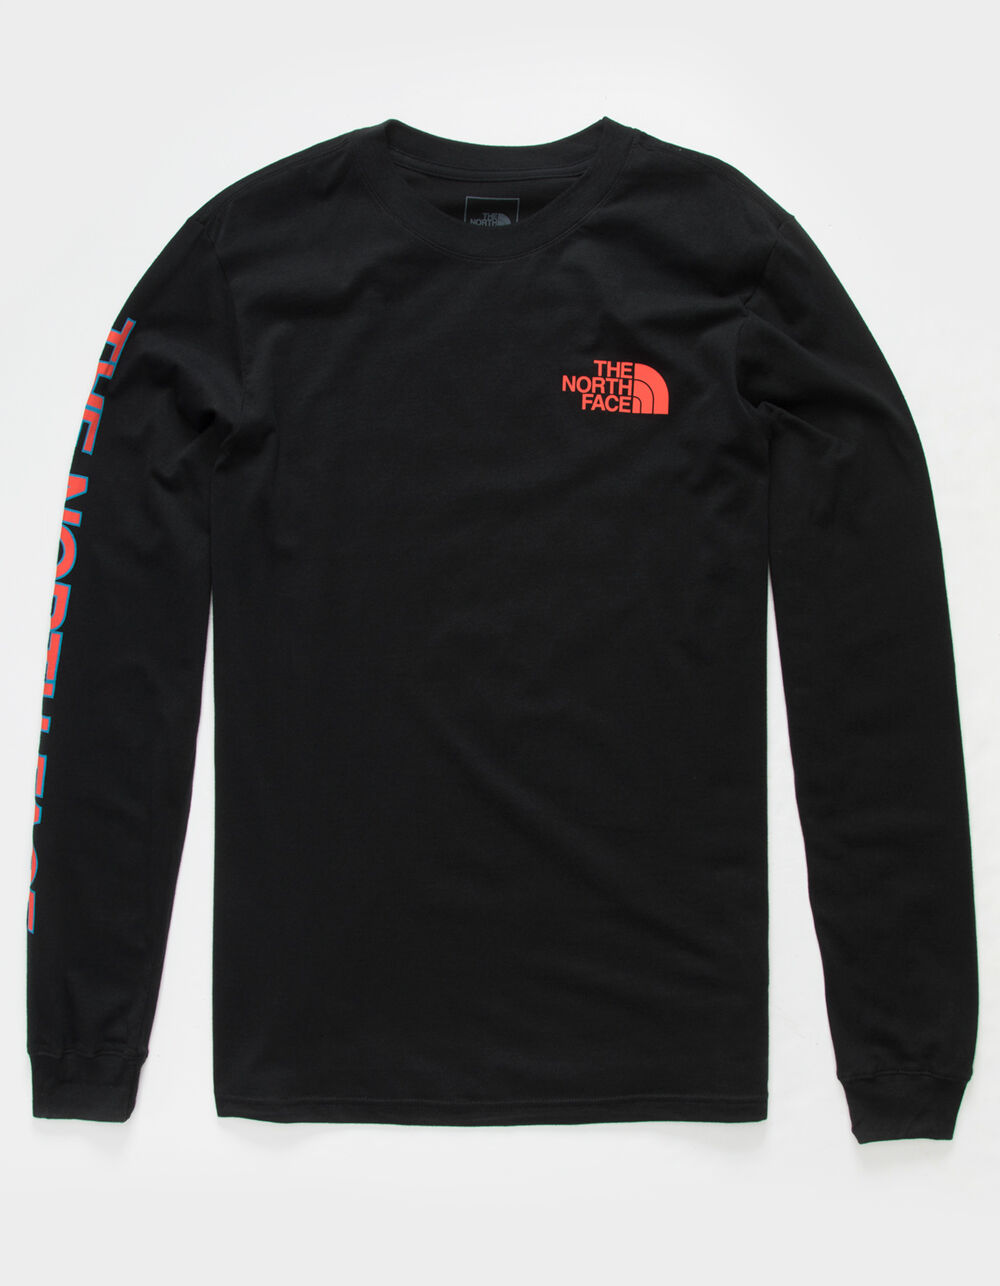 THE NORTH FACE Sleeve Red Ink Mens T-Shirt - BLACK | Tillys